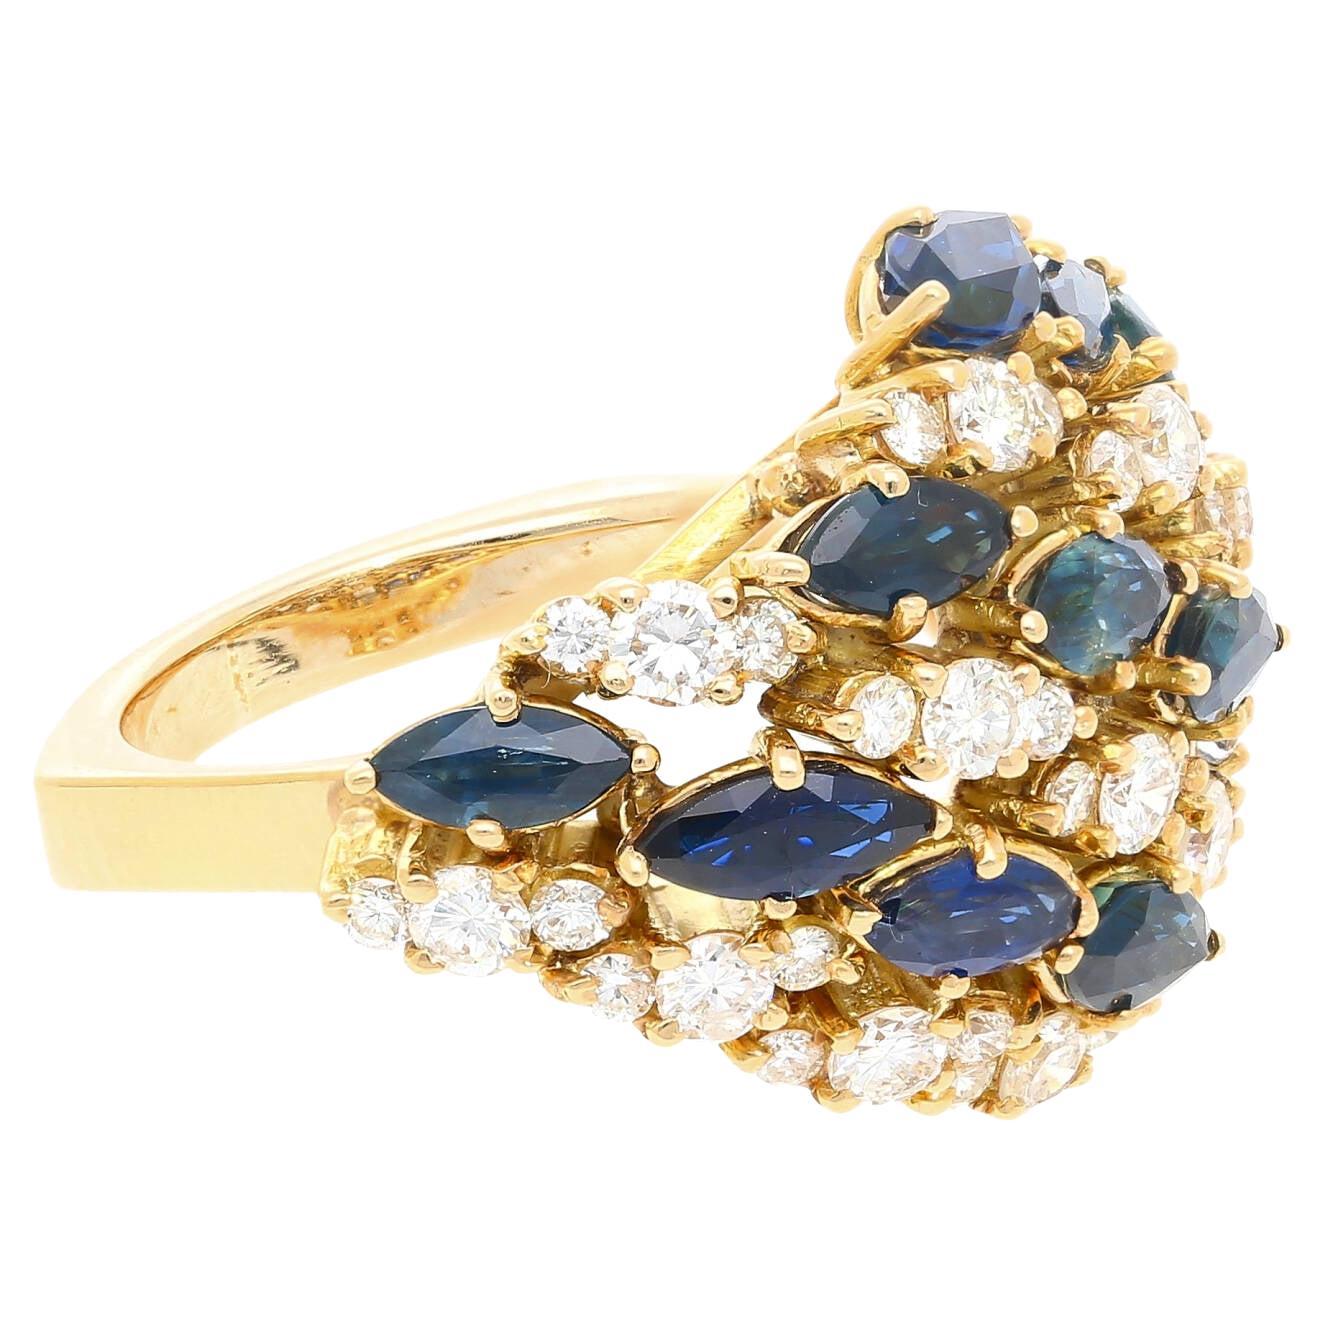 3.50 carat marquise cut blue sapphire and 1 carat round cut diamond cluster ring in 18k yellow gold. Handmade with a gorgeous contrast design. 12 Marquise cut sapphires and 36 round cut diamonds. Each blue sapphire is securely 4-prong set with a